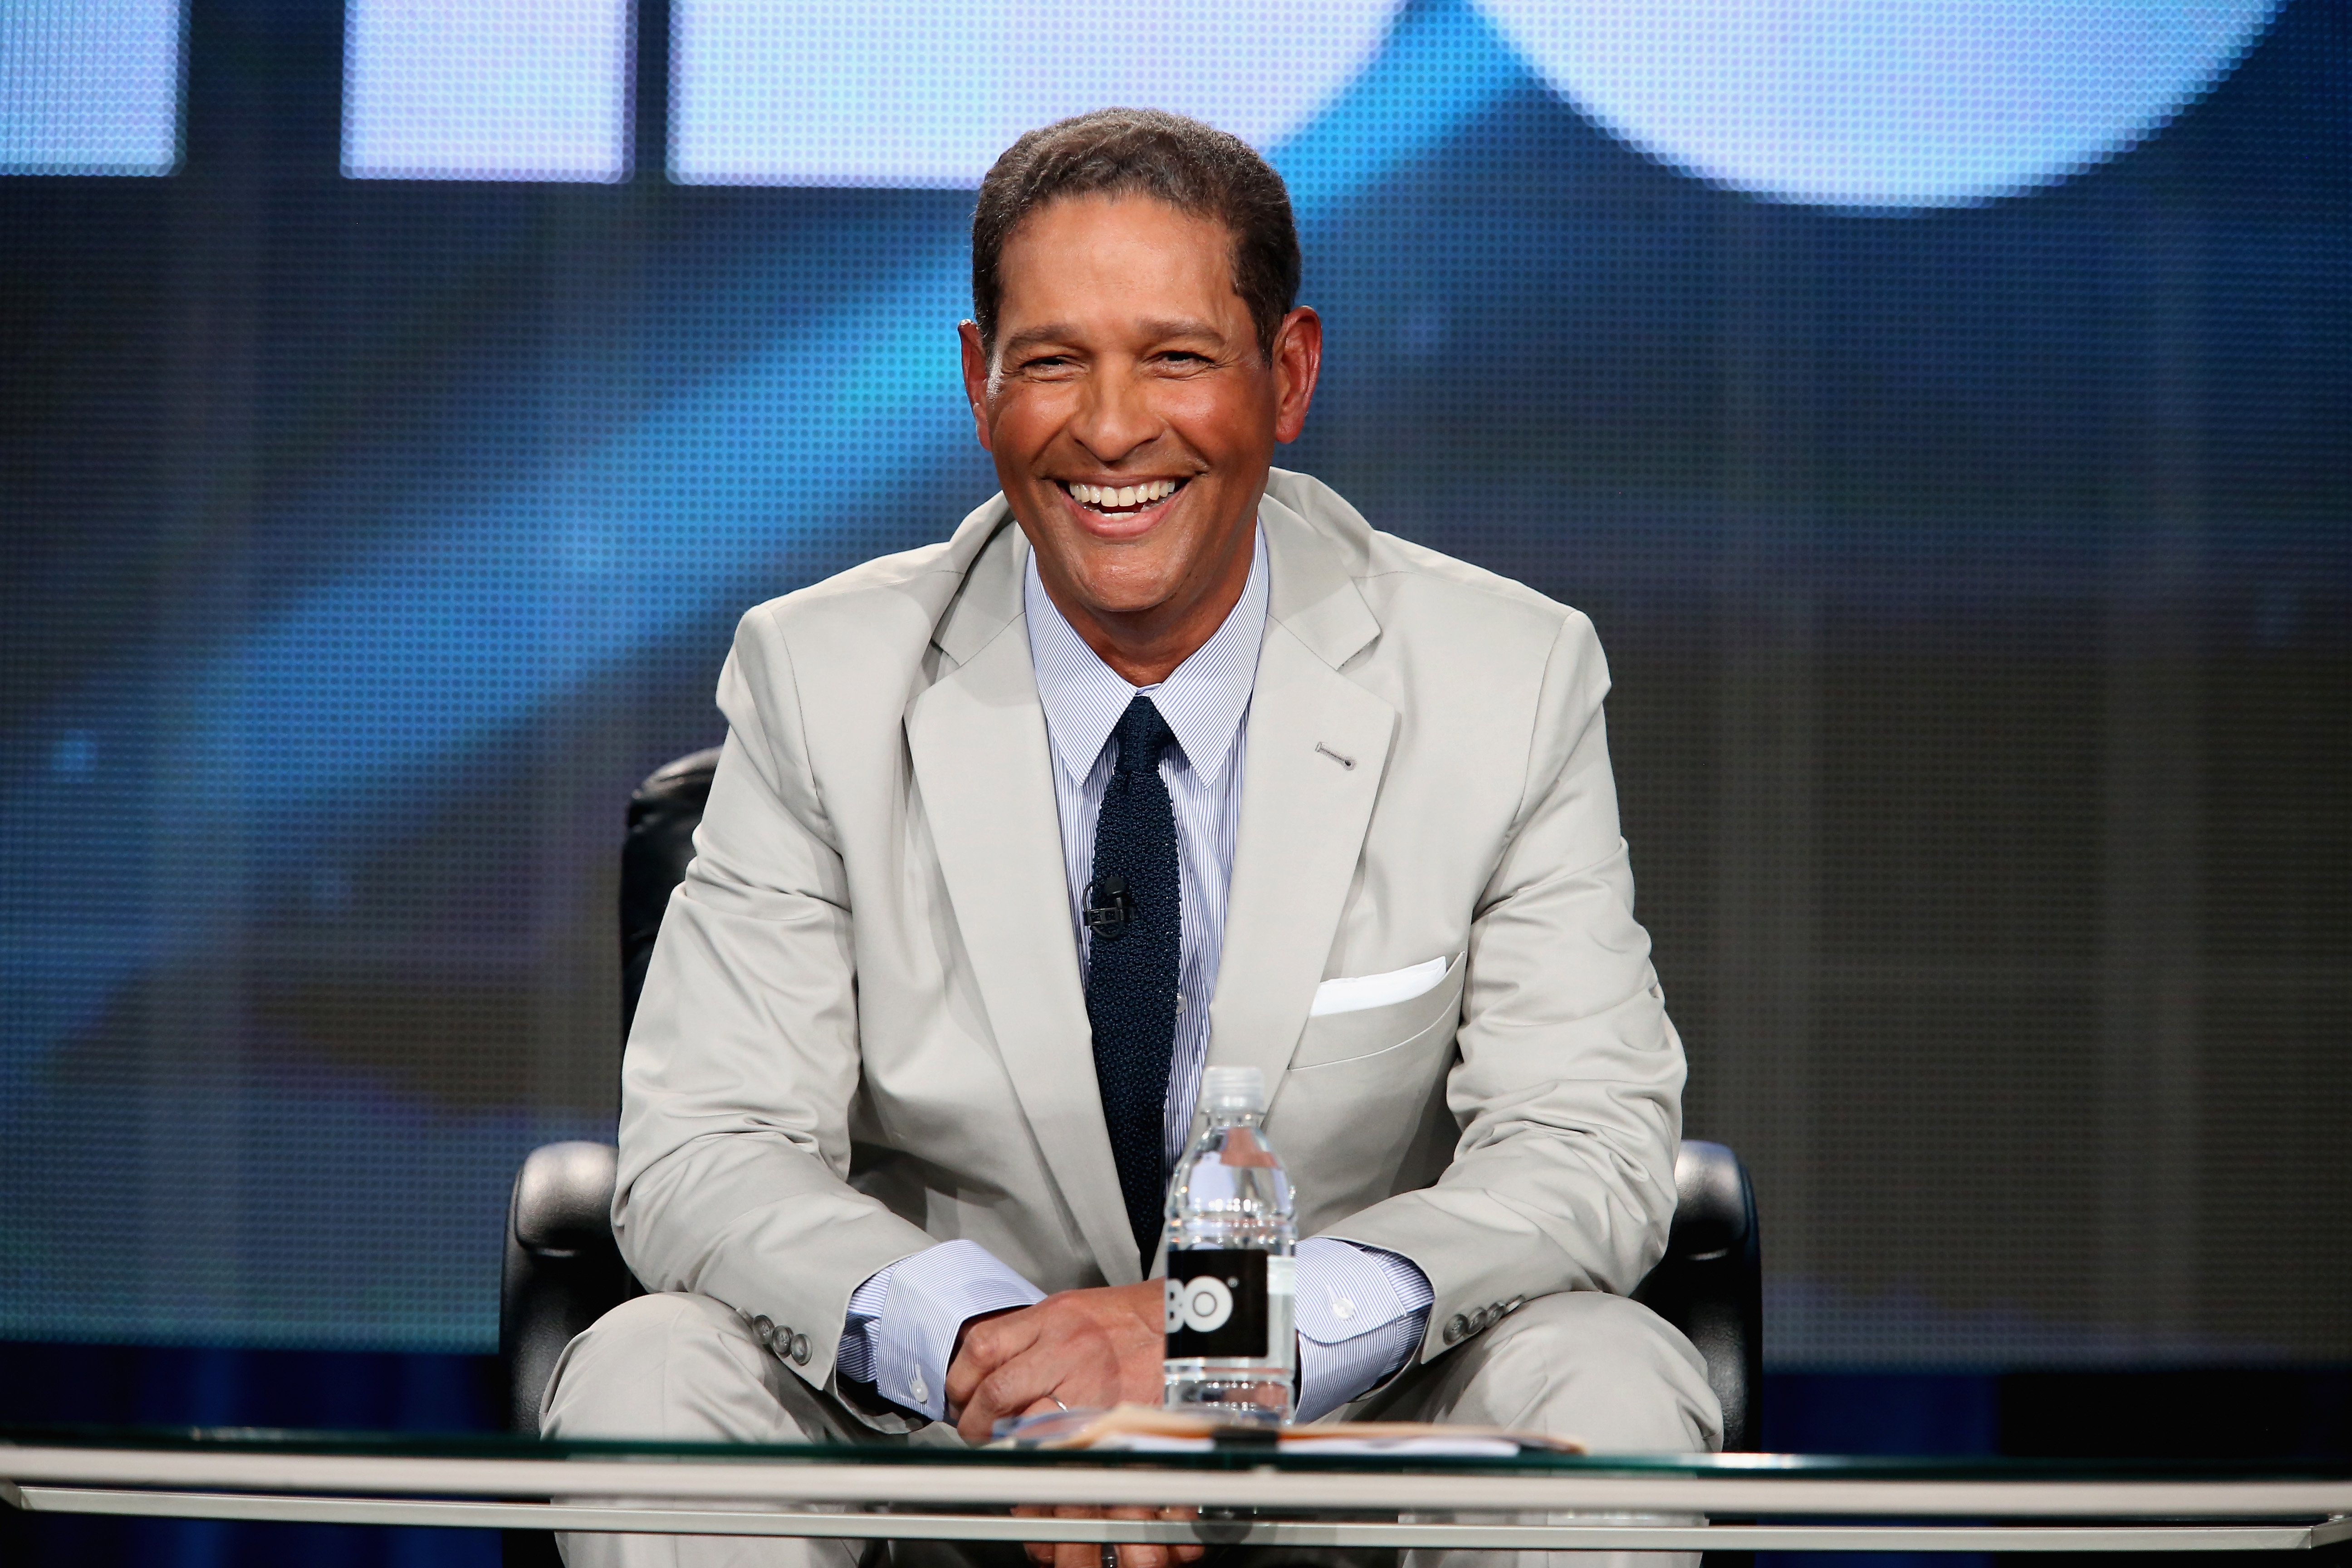 Bryant Gumbel at the 'Real Sports with Bryant Gumbel' panel at the HBO portion of the 2015 Winter Television Critics Association press tour on January 8, 2015 | Photo: GettyImages